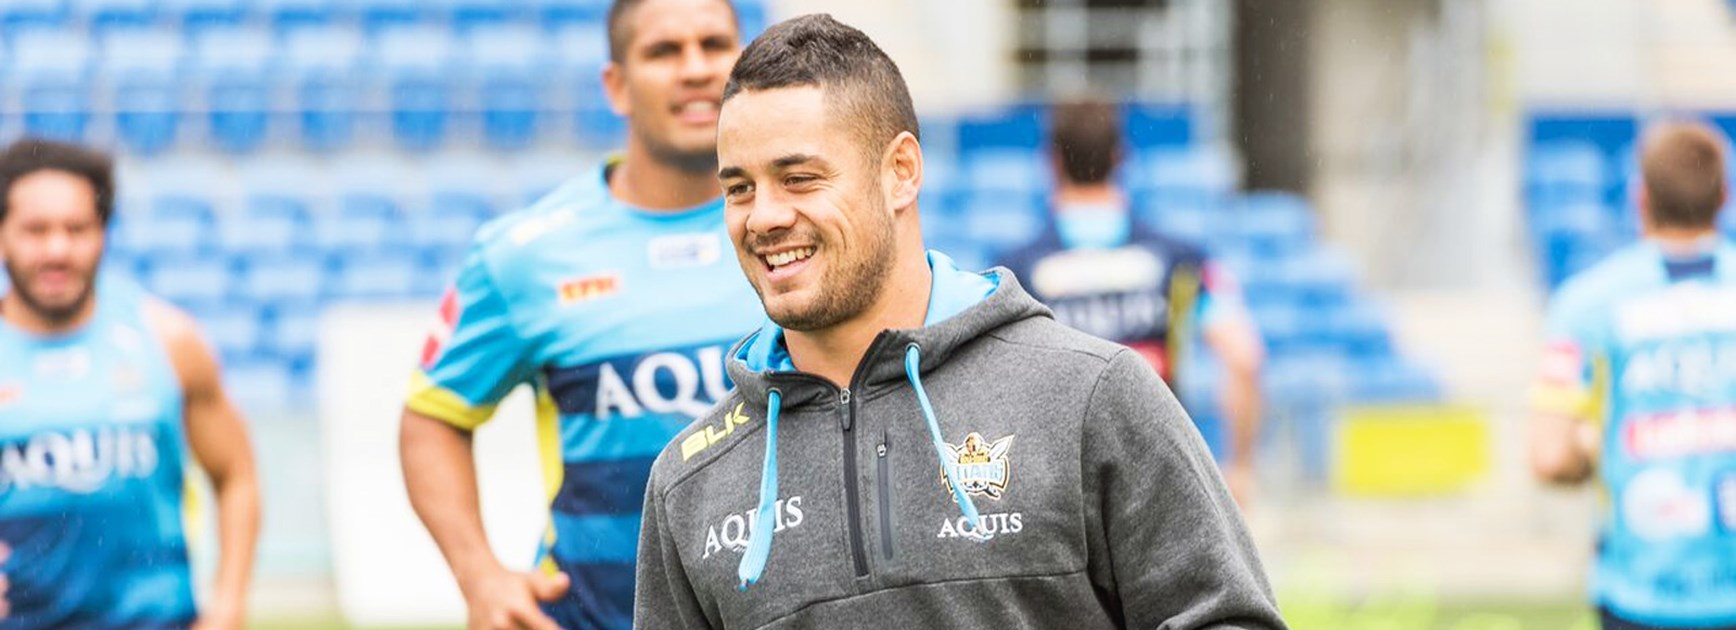 Jarryd Hayne at his first day of training with the Gold Coast Titans.